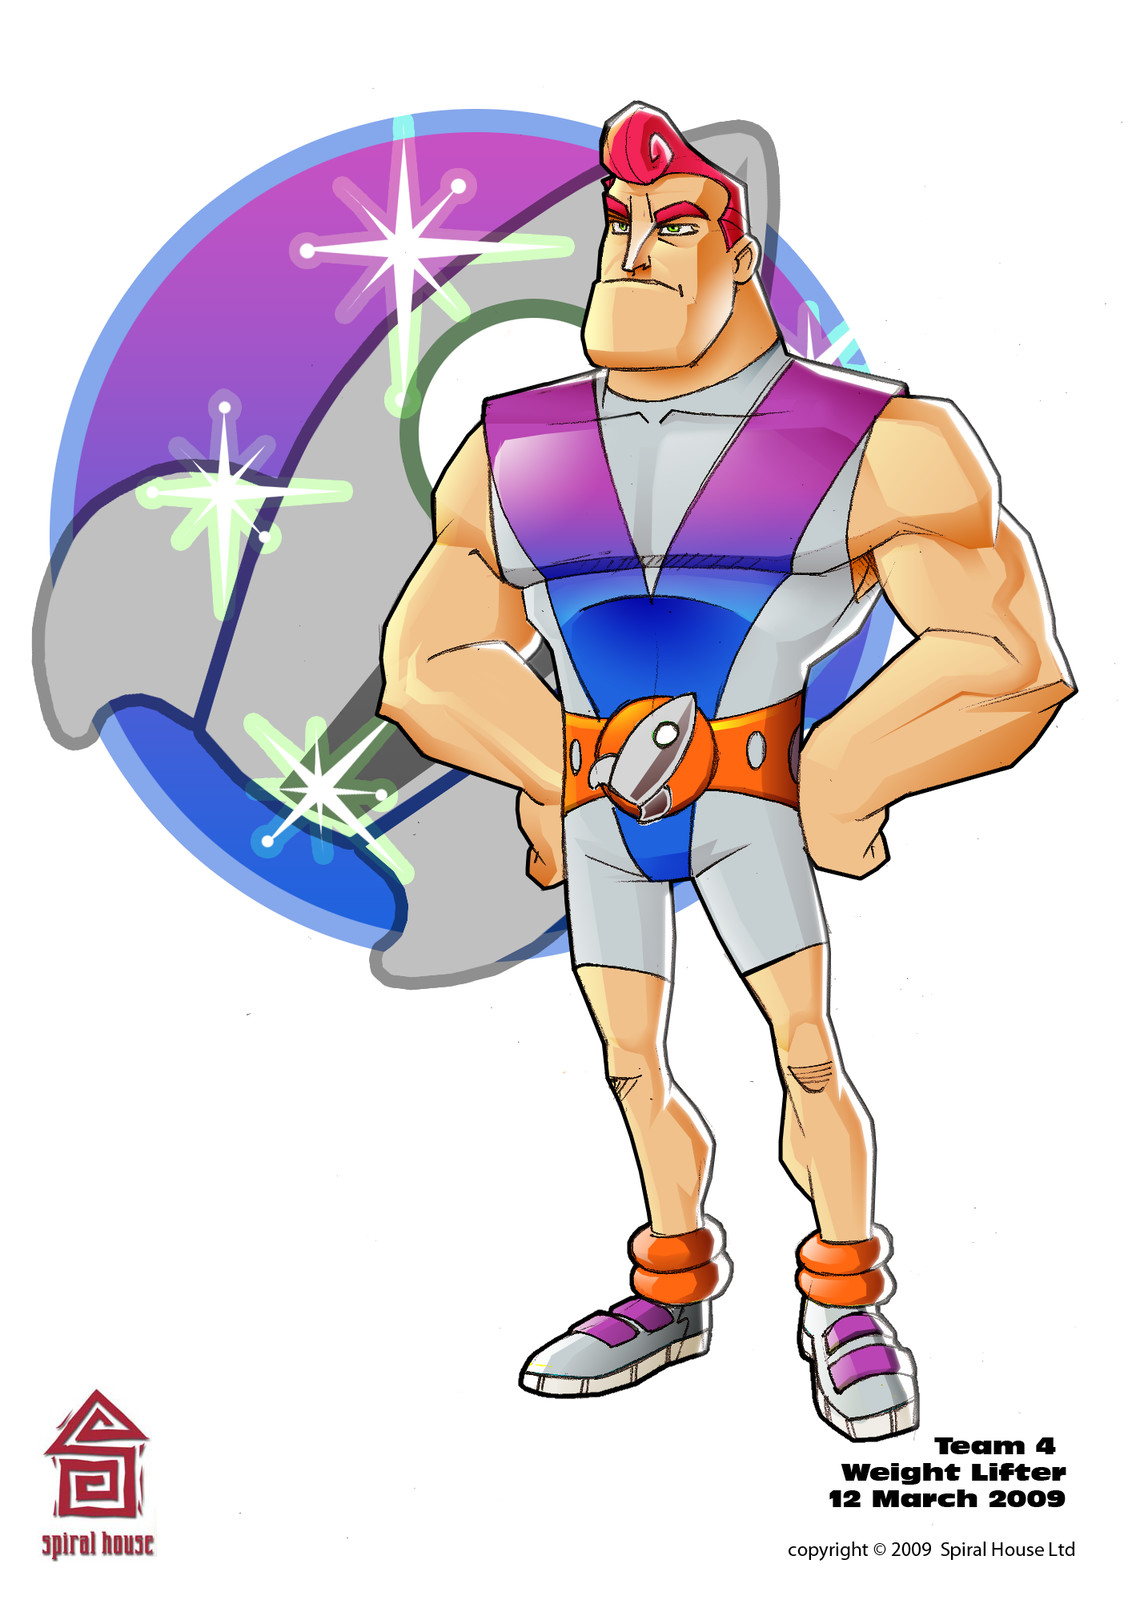 Colour concept of Team 4 Wrestler character for AR game.